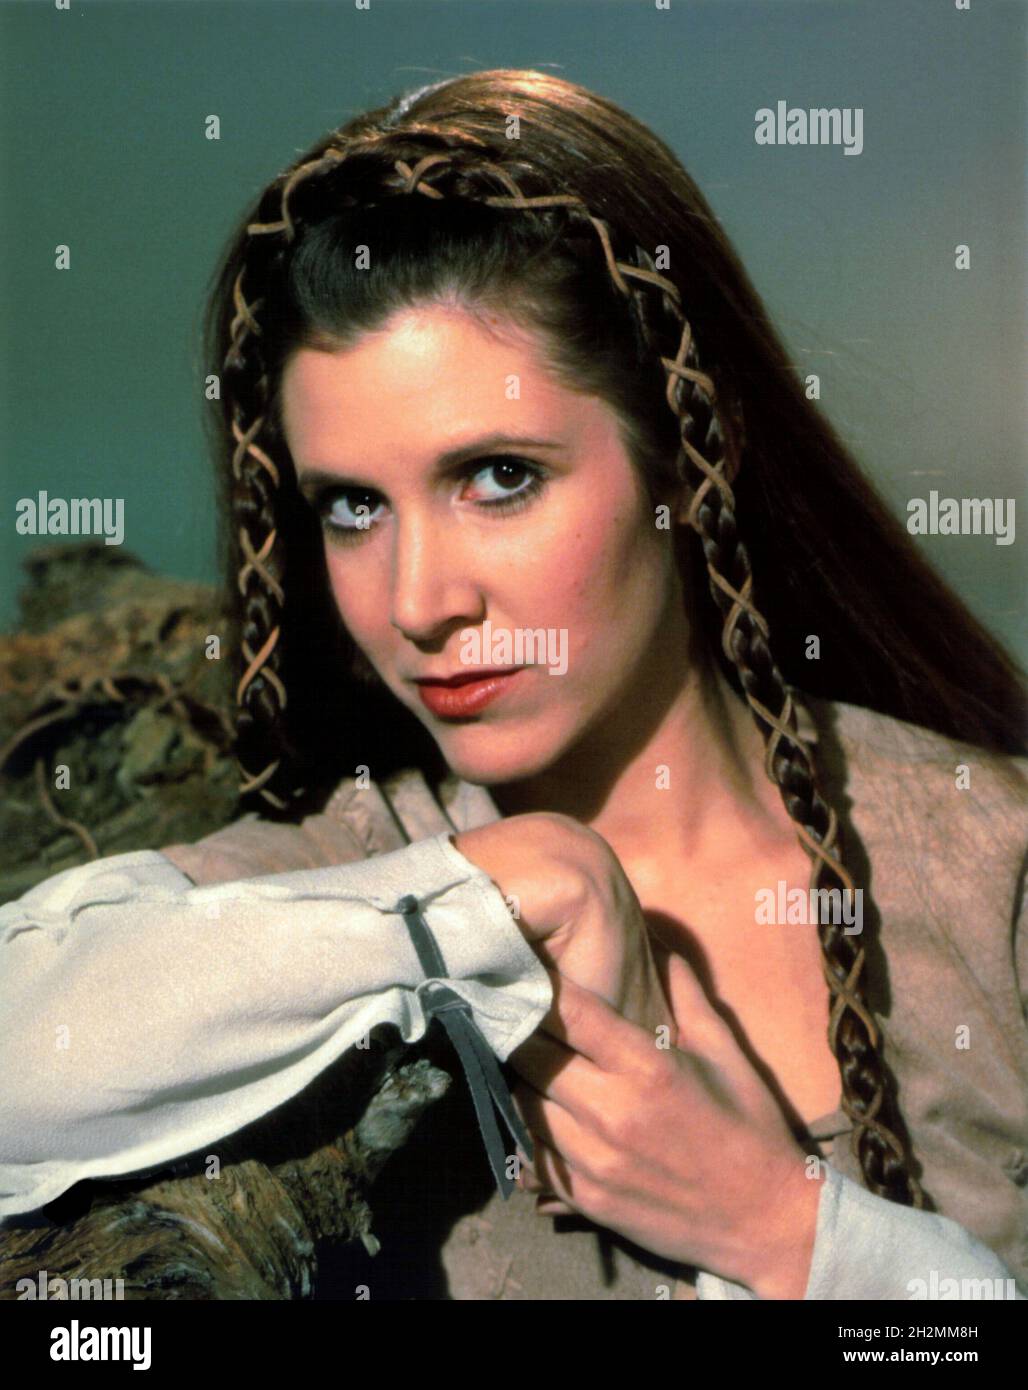 CARRIE FISHER in STAR WARS: EPISODE IV-A NEW HOPE (1977), directed by GEORGE LUCAS. Credit: LUCASFILM/20TH CENTURY FOX / Album Stock Photo